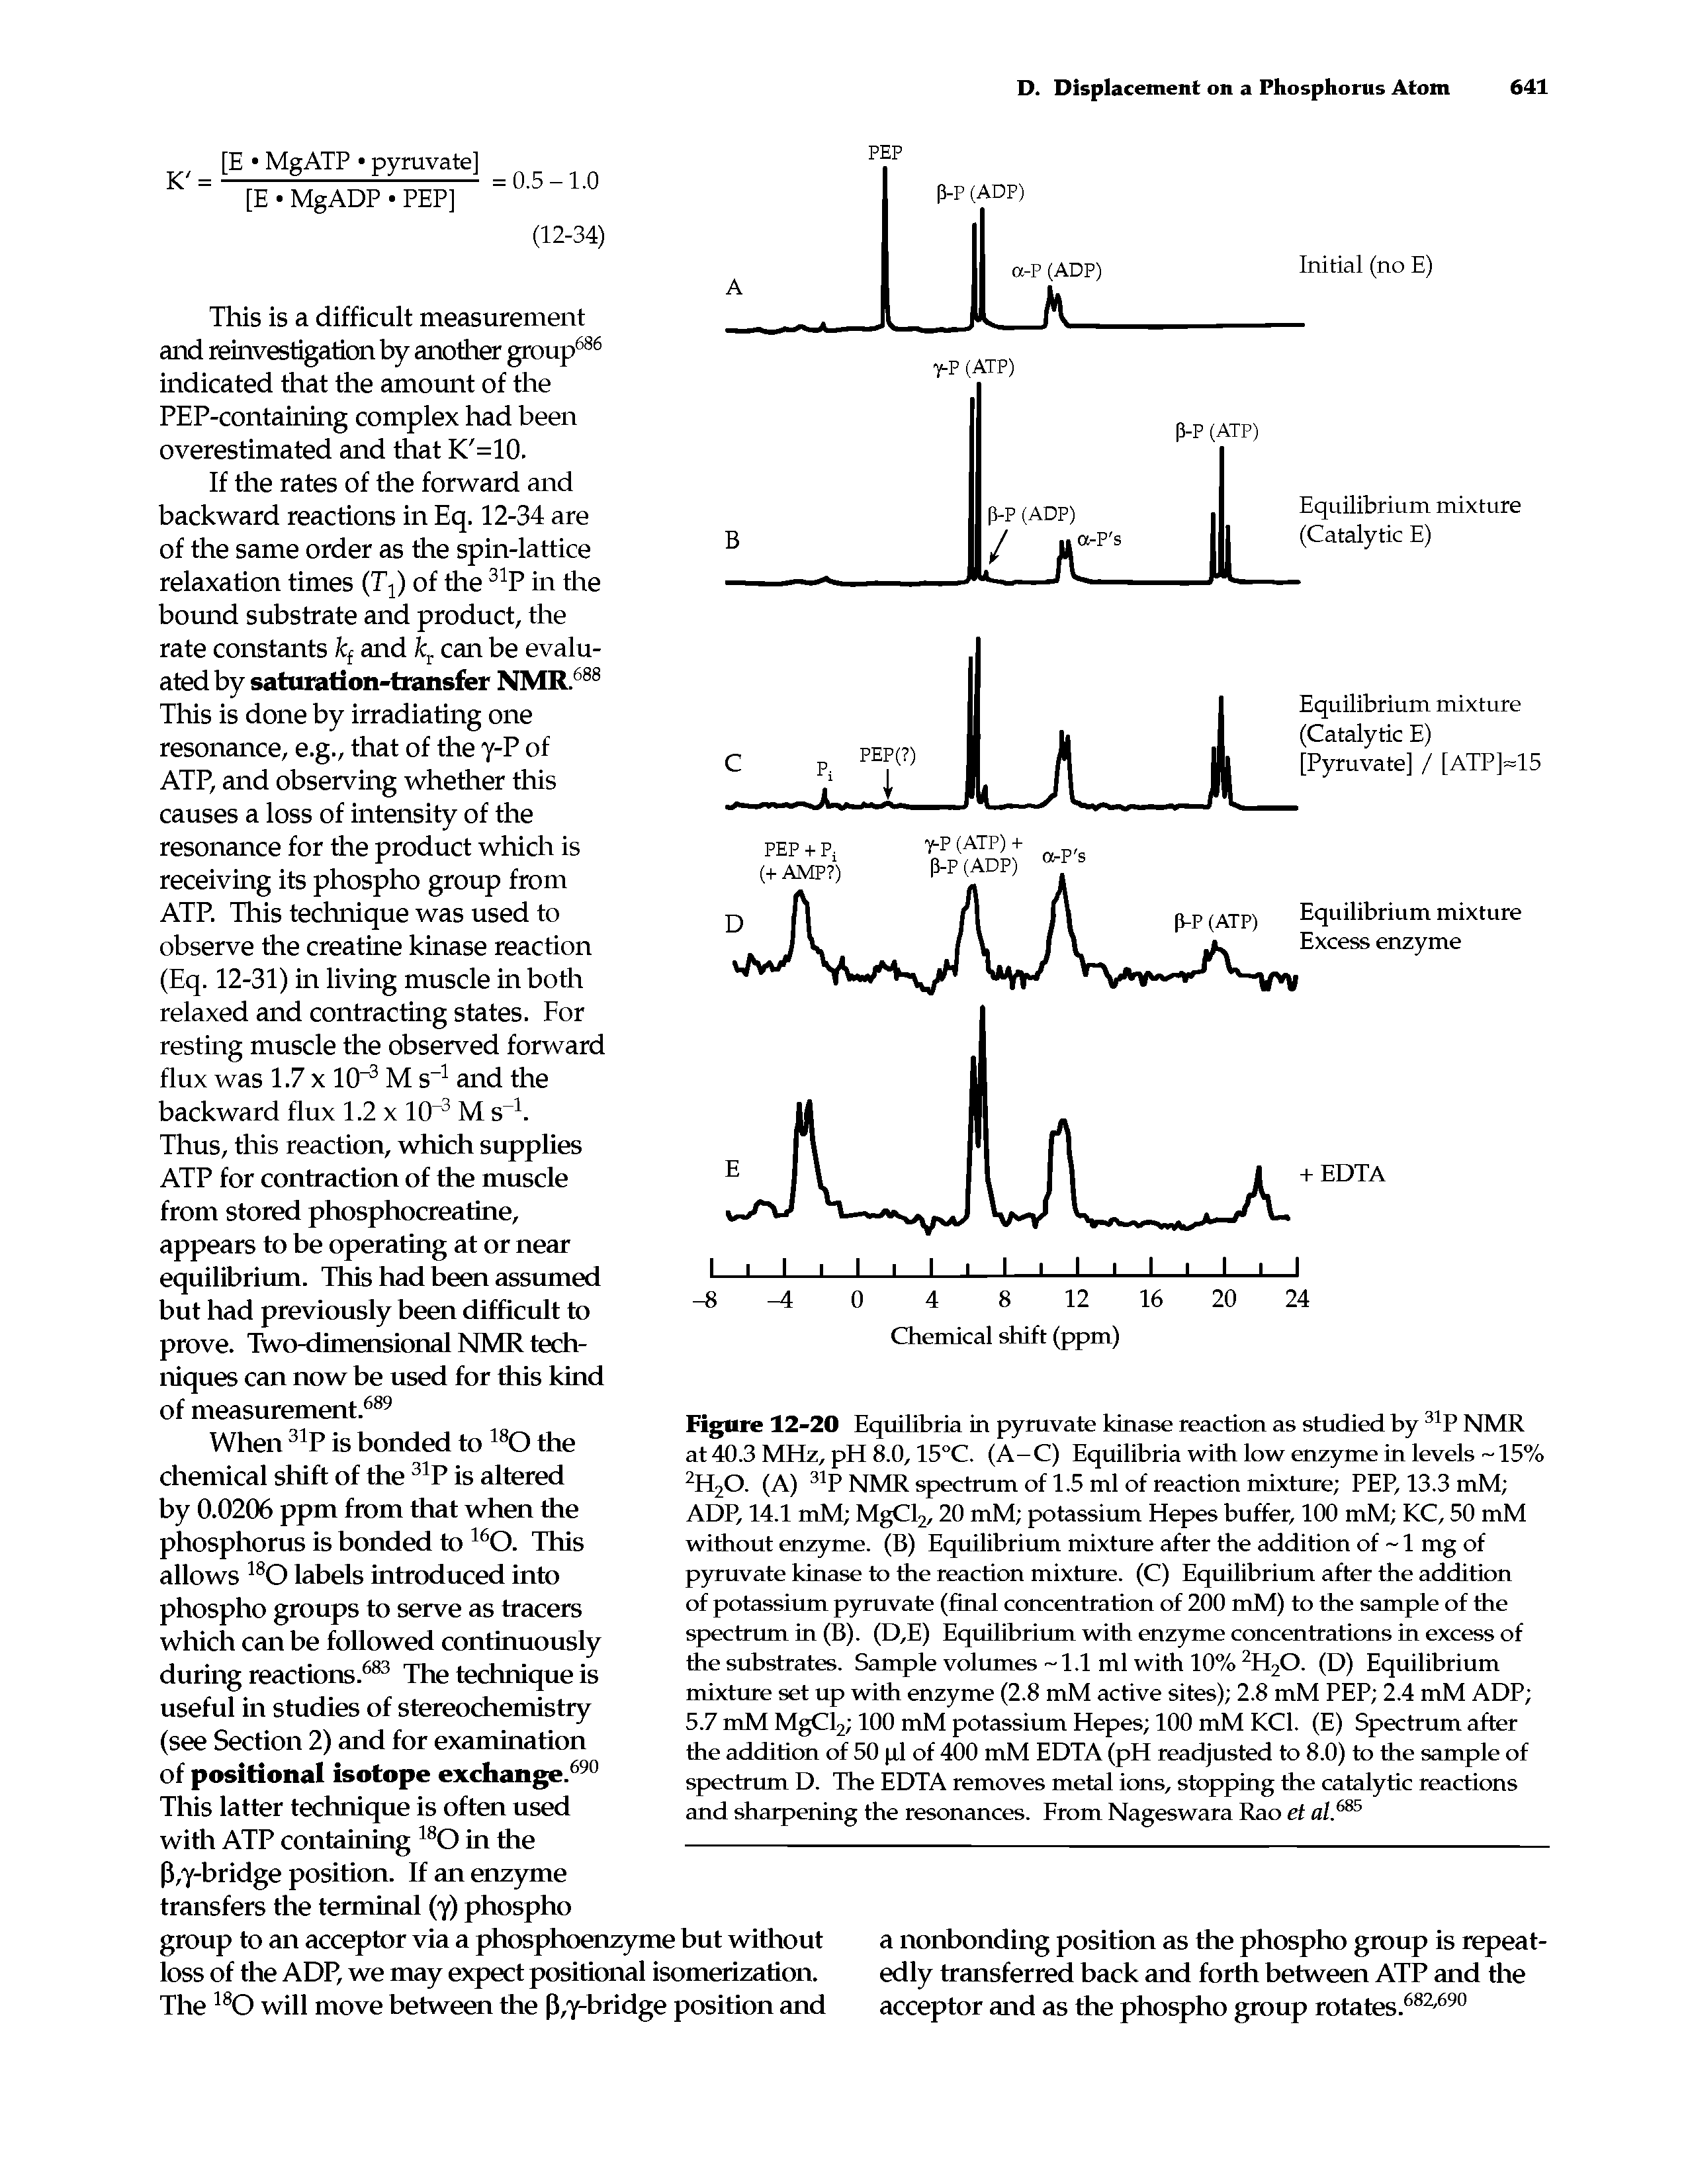 Figure 12-20 Equilibria in pyruvate kinase reaction as studied by 31P NMR at 40.3 MHz, pH 8.0,15°C. (A-C) Equilibria with low enzyme in levels 15% 2H20. (A) nP NMR spectrum of 1.5 ml of reaction mixture PEP, 13.3 mM ADP, 14.1 mM MgCl2, 20 mM potassium Hepes buffer, 100 mM KC, 50 mM without enzyme. (B) Equilibrium mixture after the addition of 1 mg of pyruvate kinase to the reaction mixture. (C) Equilibrium after the addition of potassium pyruvate (final concentration of 200 mM) to the sample of the spectrum in (B). (D,E) Equilibrium with enzyme concentrations in excess of the substrates. Sample volumes 1.1 ml with 10% 2H20. (D) Equilibrium mixture set up with enzyme (2.8 mM active sites) 2.8 mM PEP 2.4 mM ADP 5.7 mM MgCl2 100 mM potassium Hepes 100 mM KC1. (E) Spectrum after the addition of 50 pi of 400 mM EDTA (pH readjusted to 8.0) to the sample of spectrum D. The EDTA removes metal ions, stopping the catalytic reactions and sharpening the resonances. From Nageswara Rao et al.685...